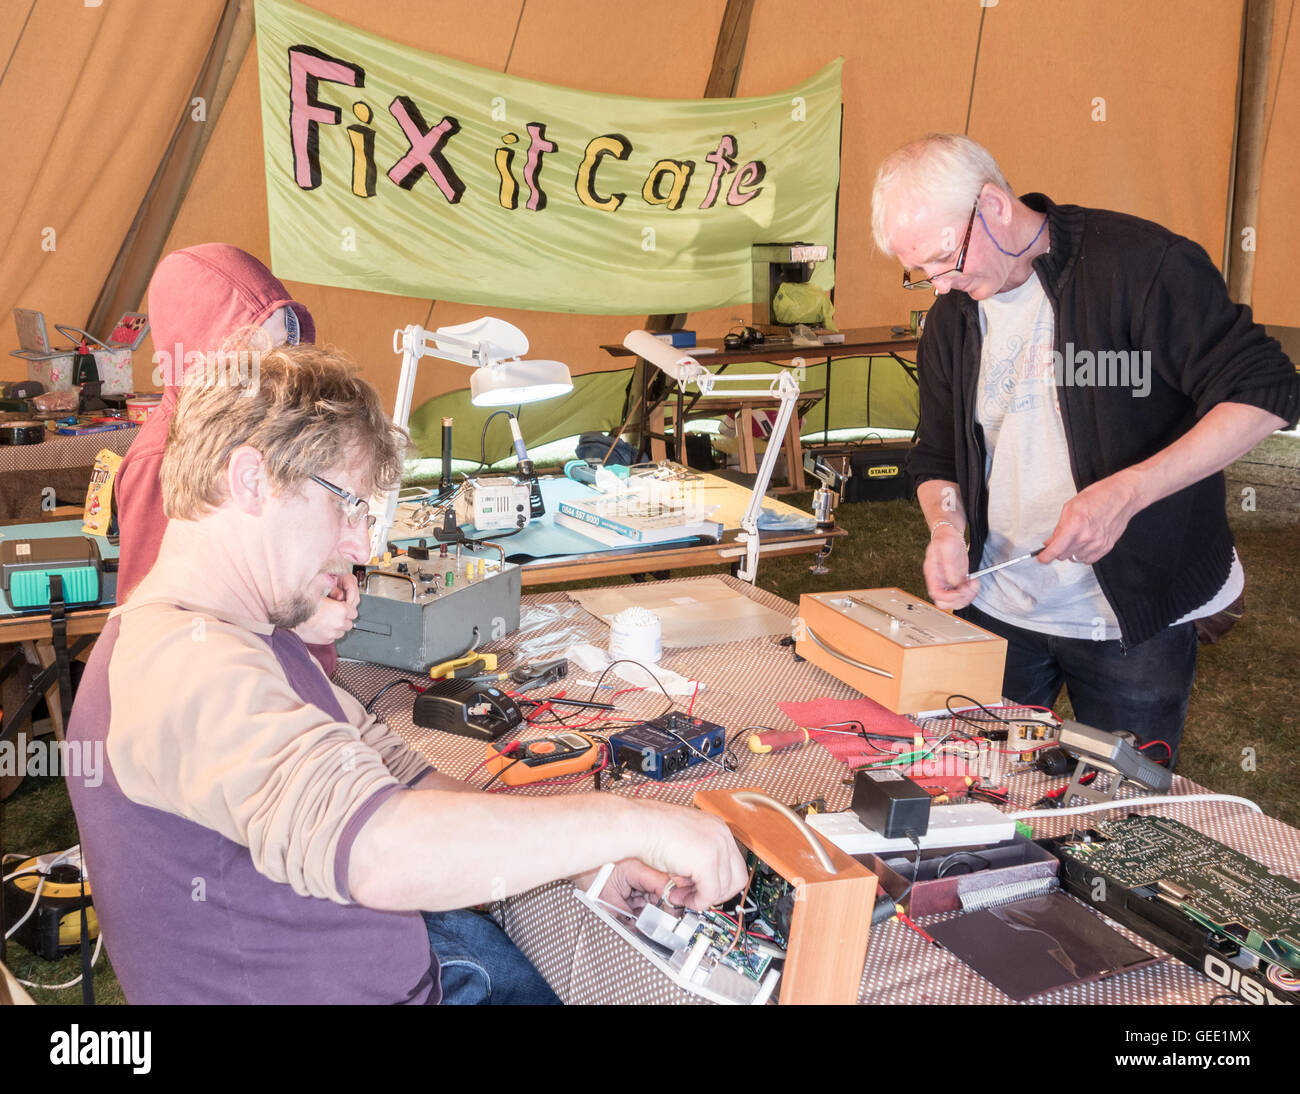 'Fix it Cafe' at Festival of Thrift at Lingfield point, Darlington, County Durham, England, United Kingdom Stock Photo